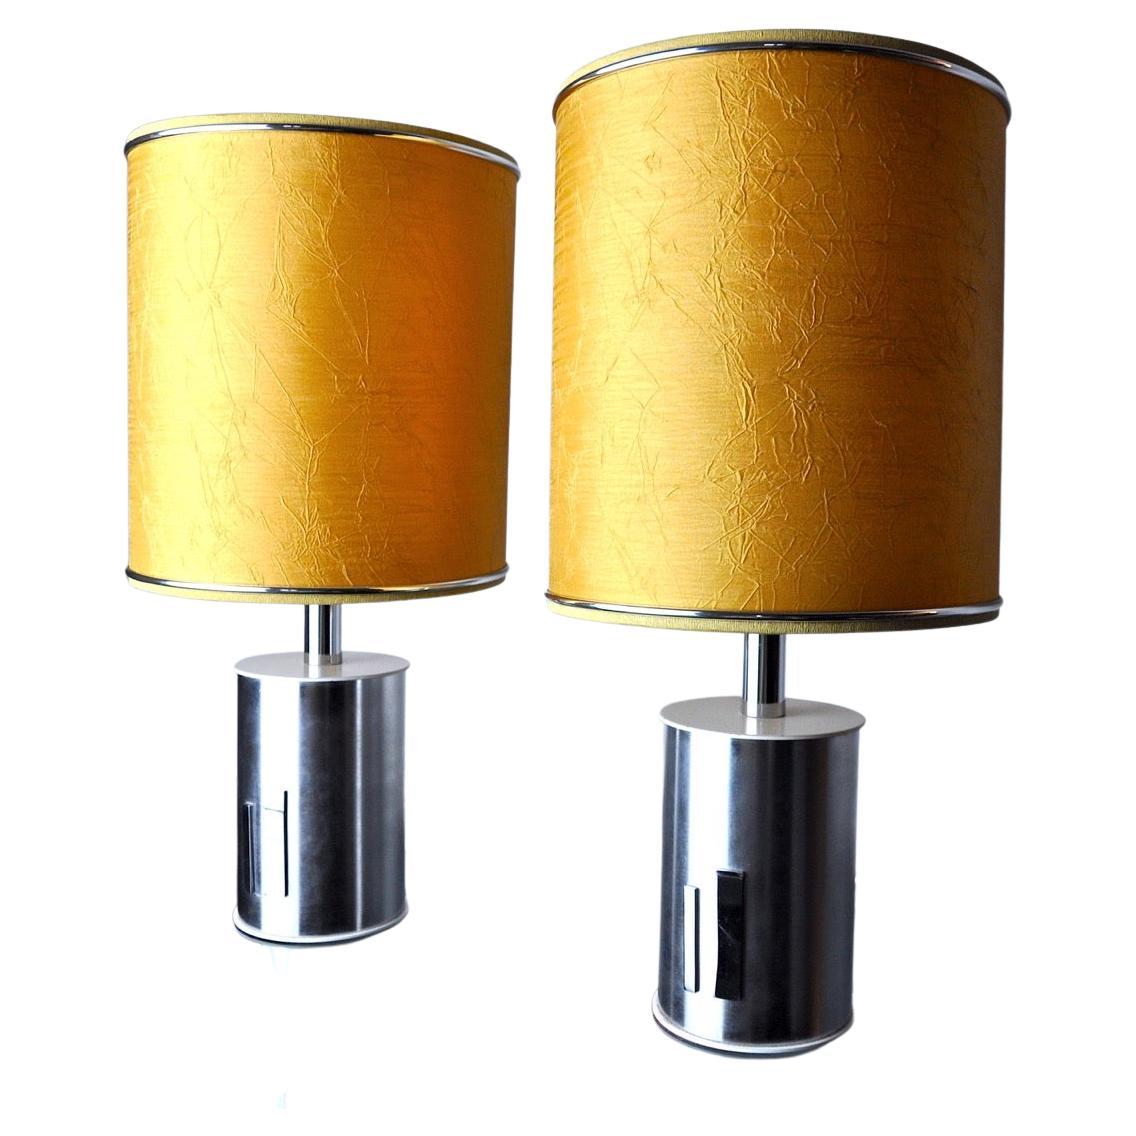 Pair of futuristic lamps by Marca SL, Spain, 1970s For Sale